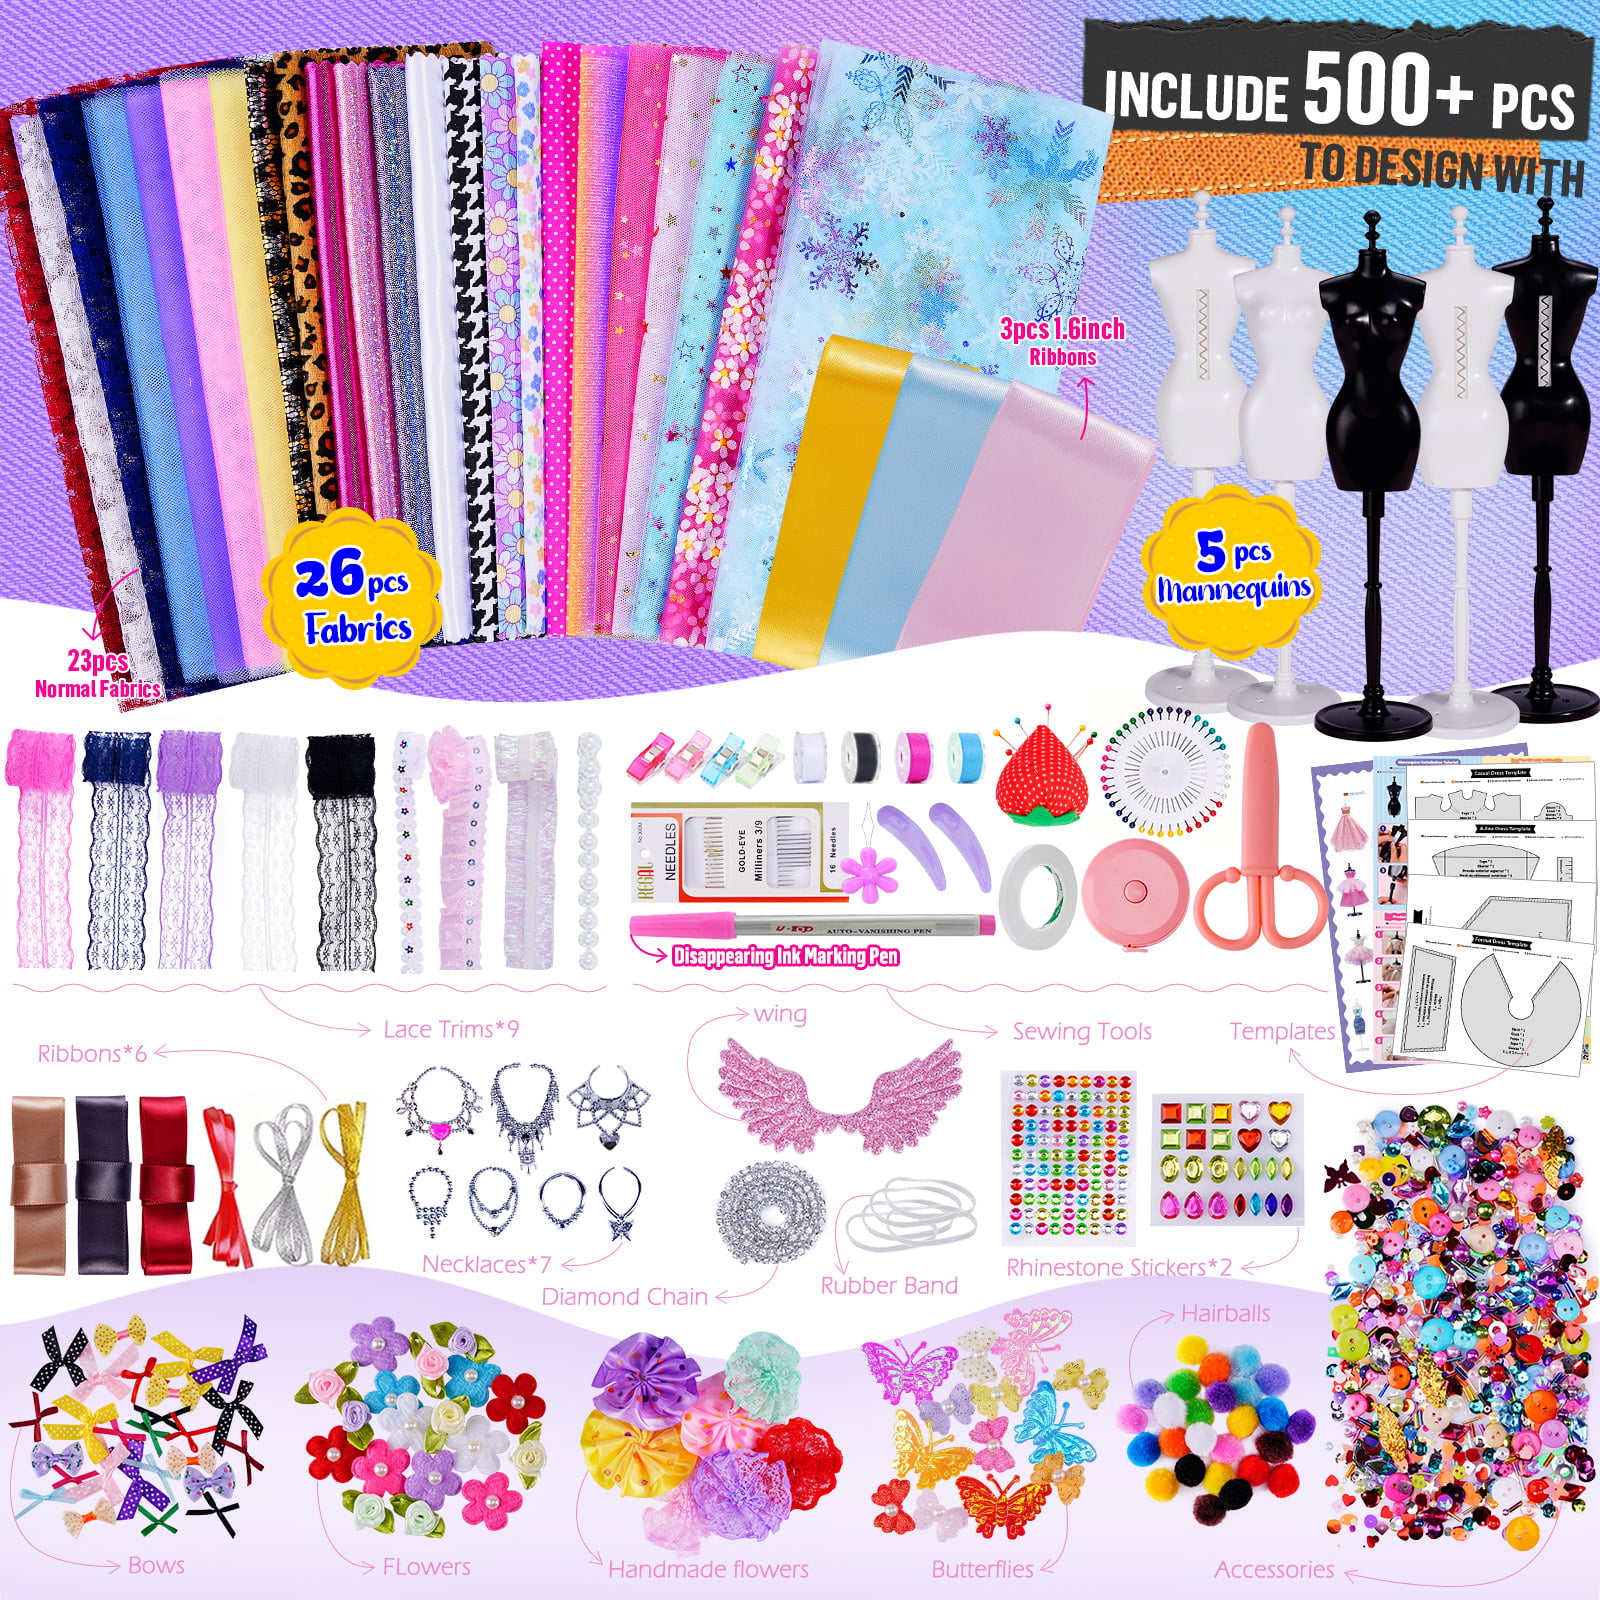  soputry Dress Design Craft Making Kit, Fashion Designer Kits  for Girls with Mannequins Clothing Creative DIY Art Craft Toys, Doll Clothes  Sewing Kit for Girls Ages 6-12+ Birthday Gift (Set A) 